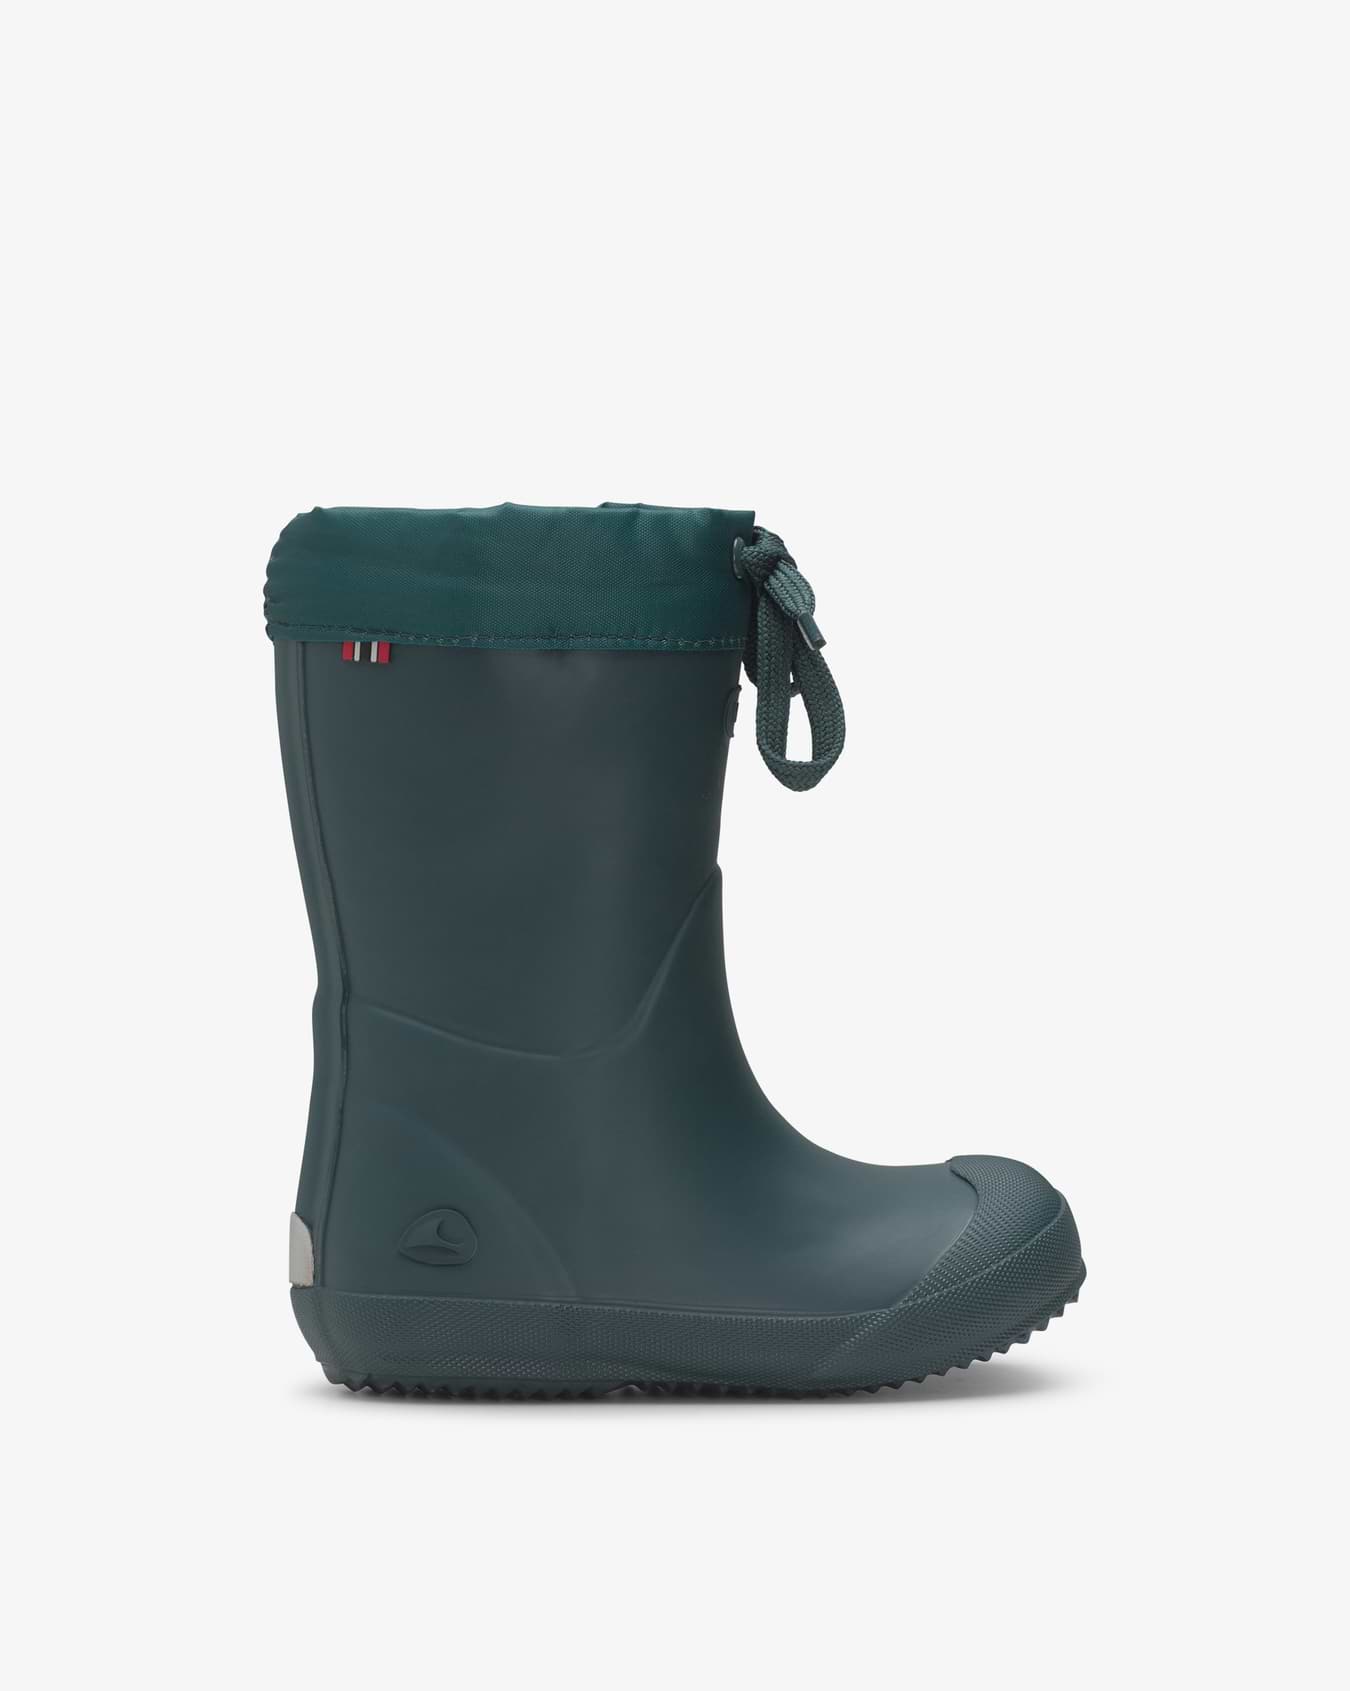 Indie Warm Petrol Rubber Boot